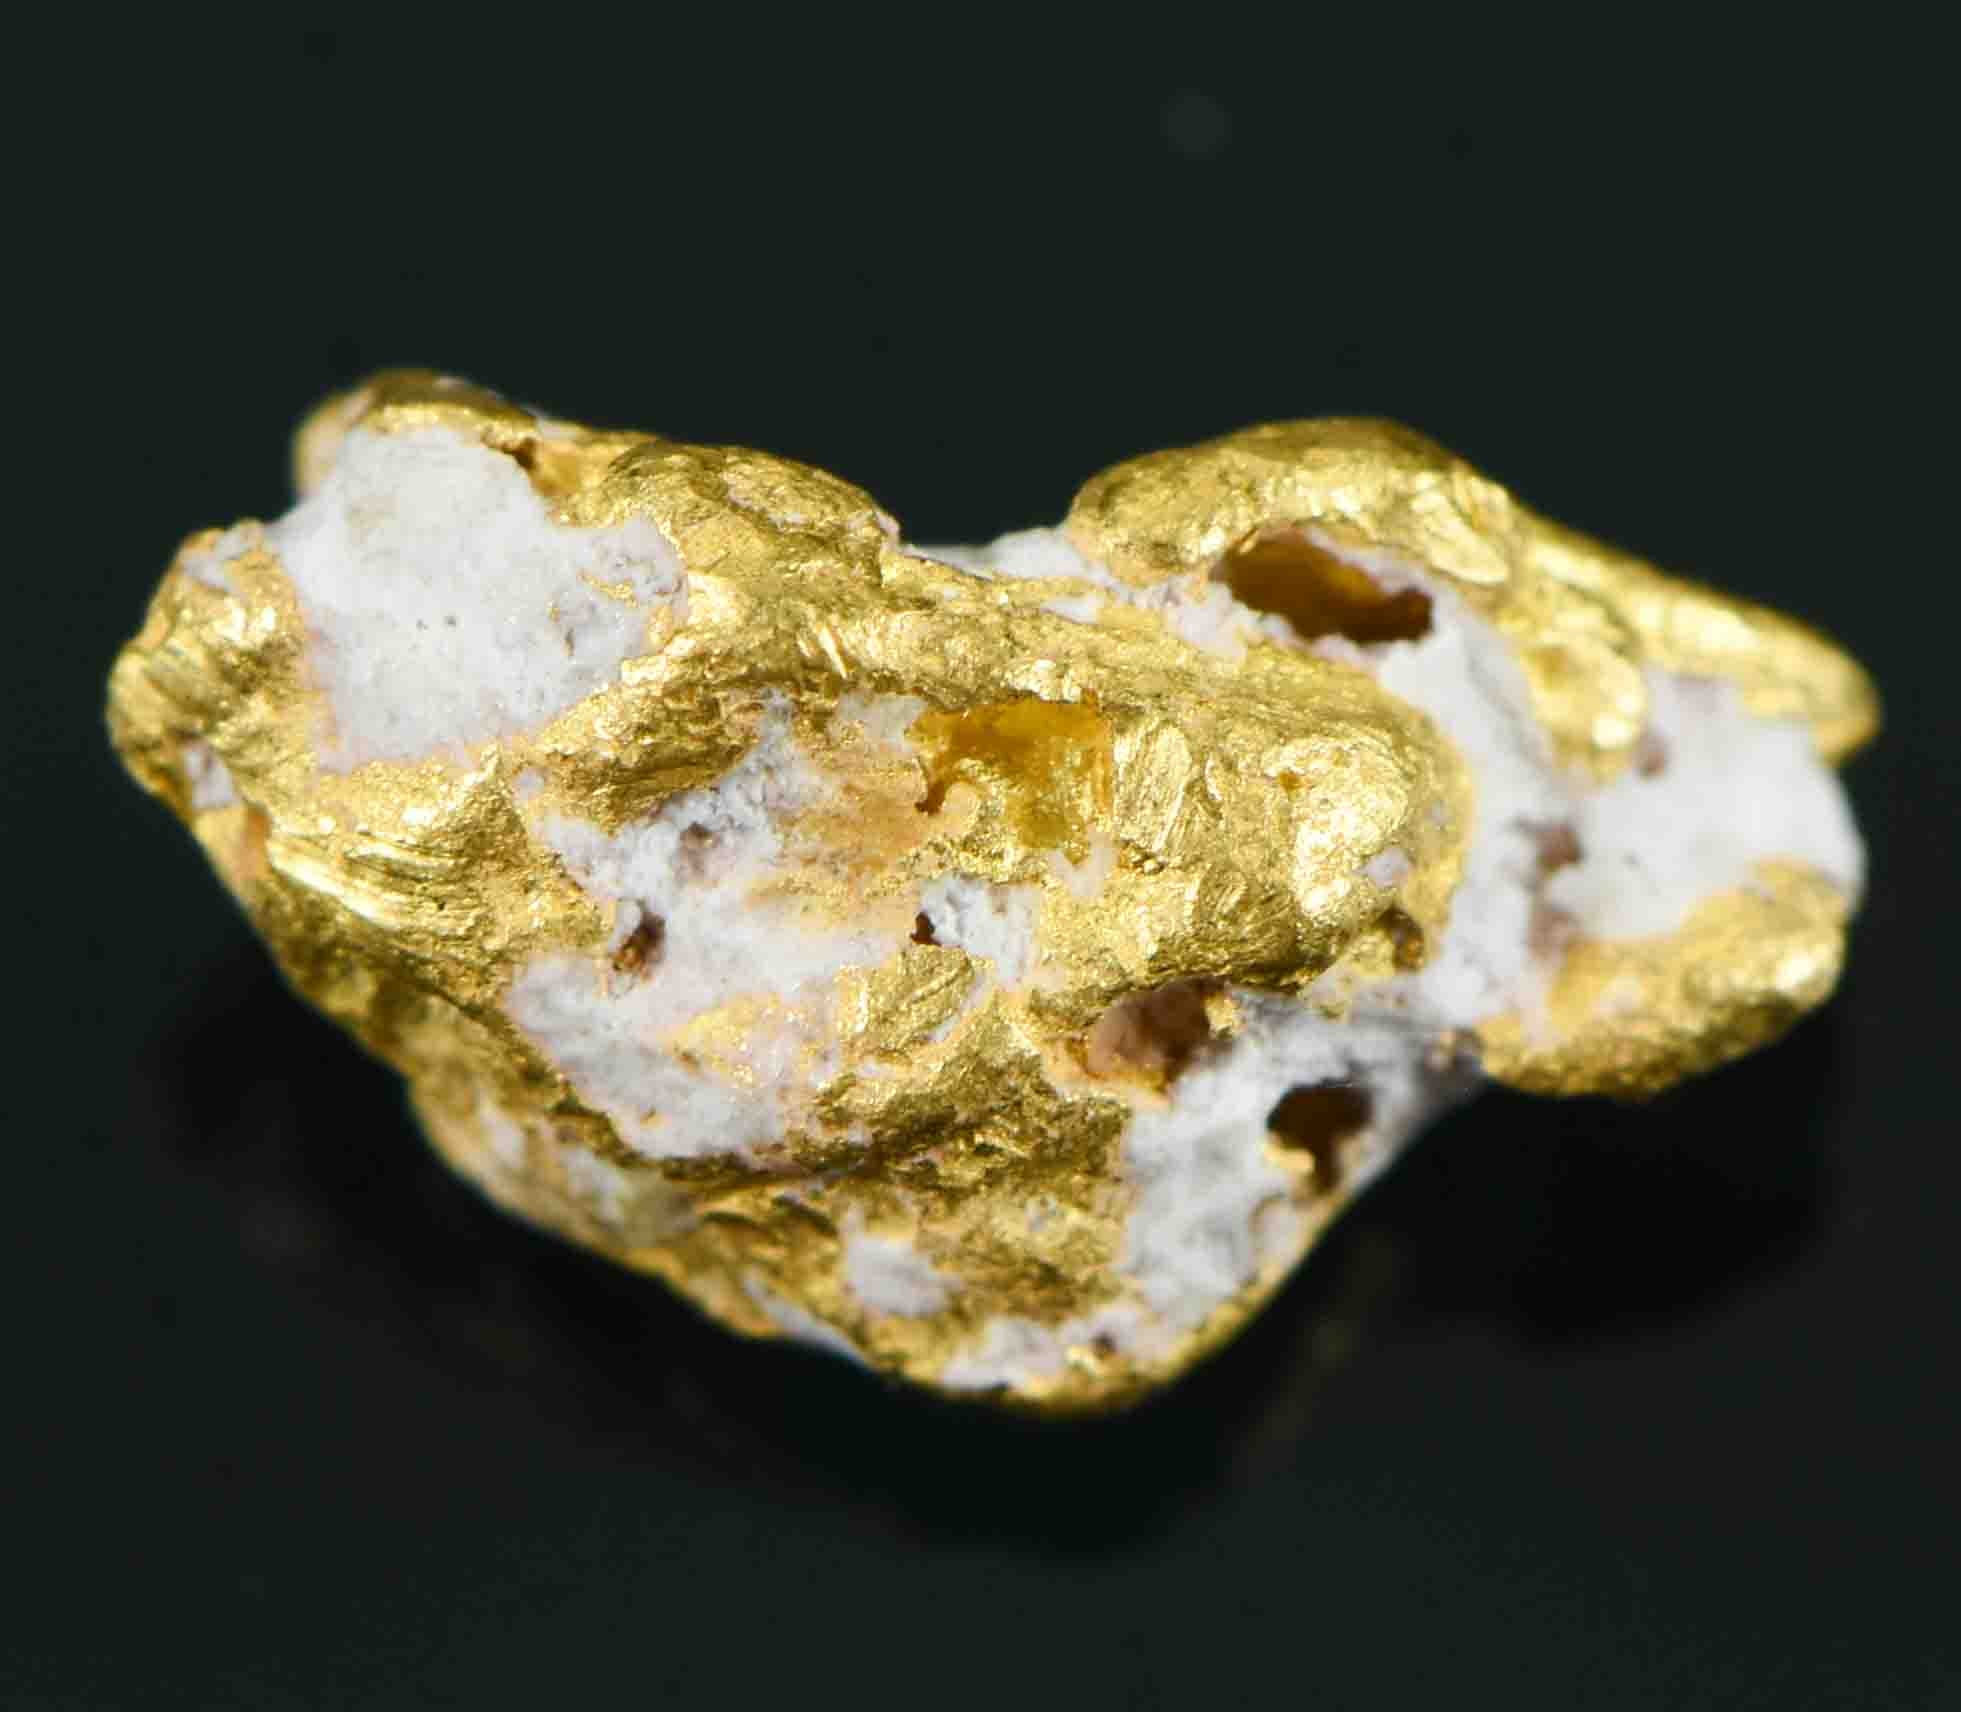 #18 Australian Natural Gold Nugget With Quartz Weighs 1.02 Grams.